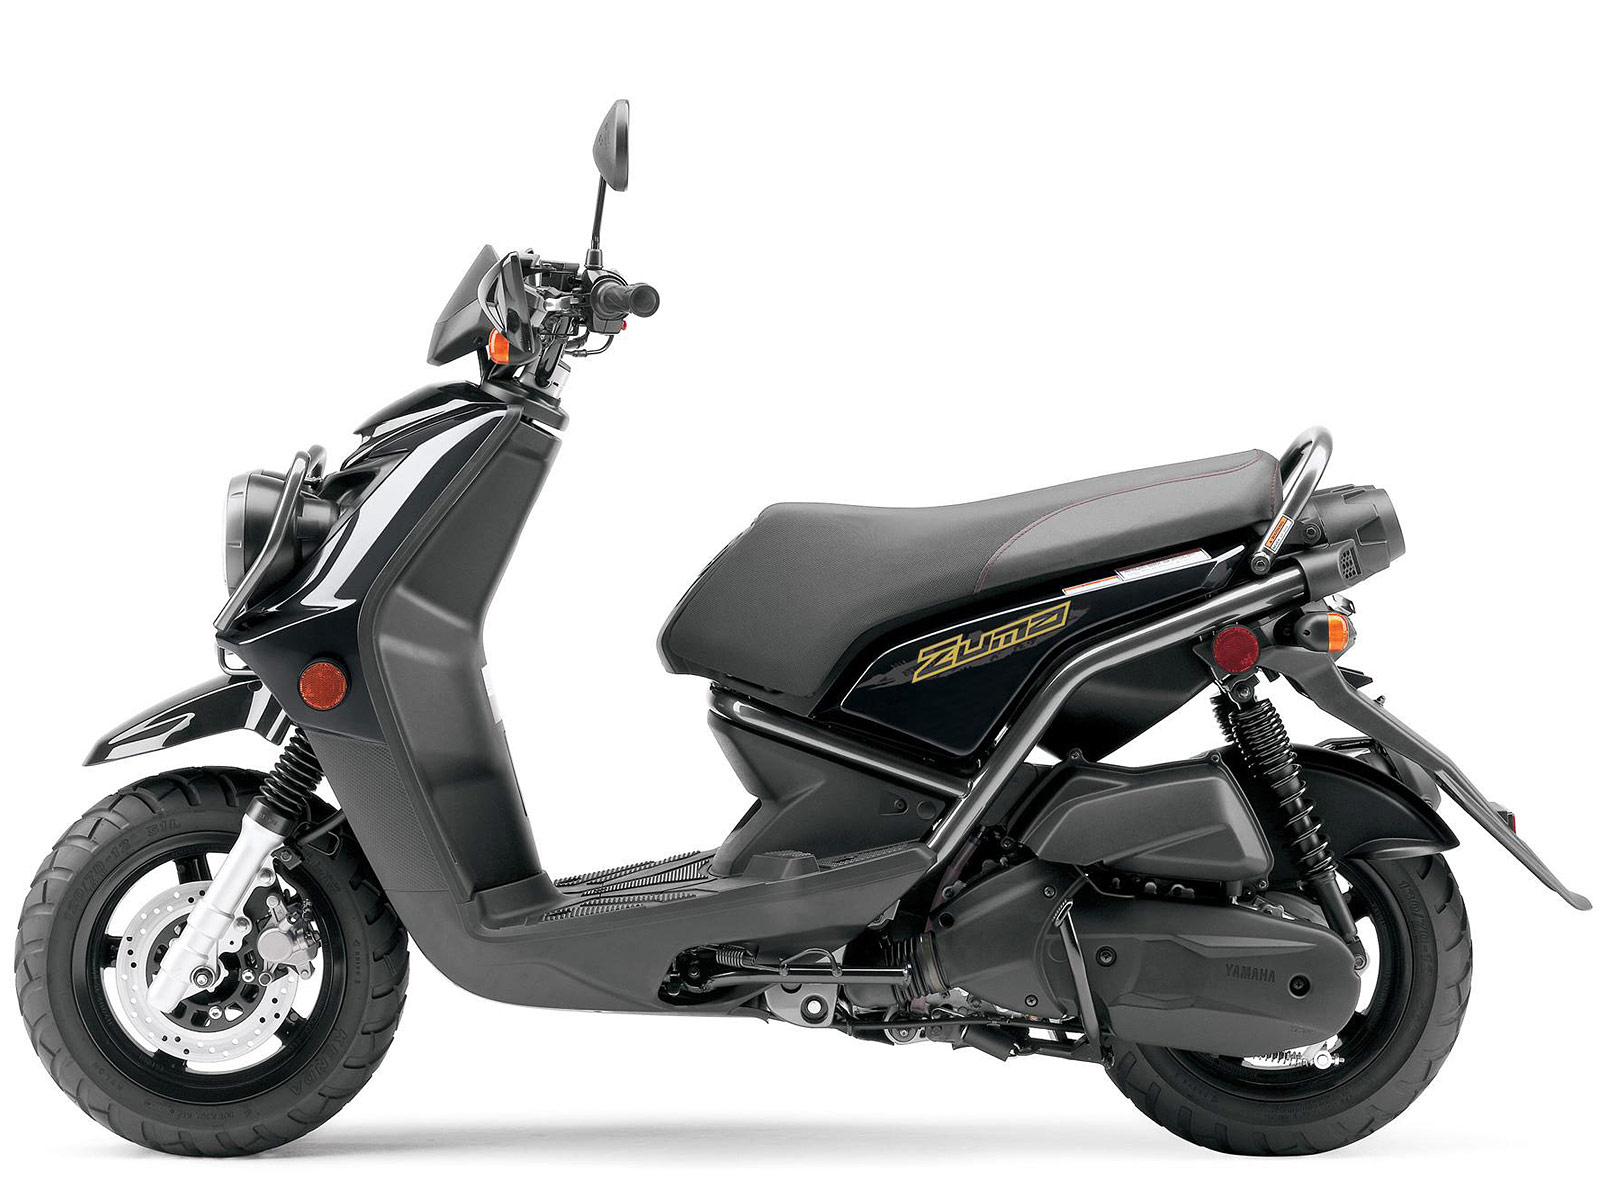 2012 Yamaha Zuma 125 Scooter pictures, specifications